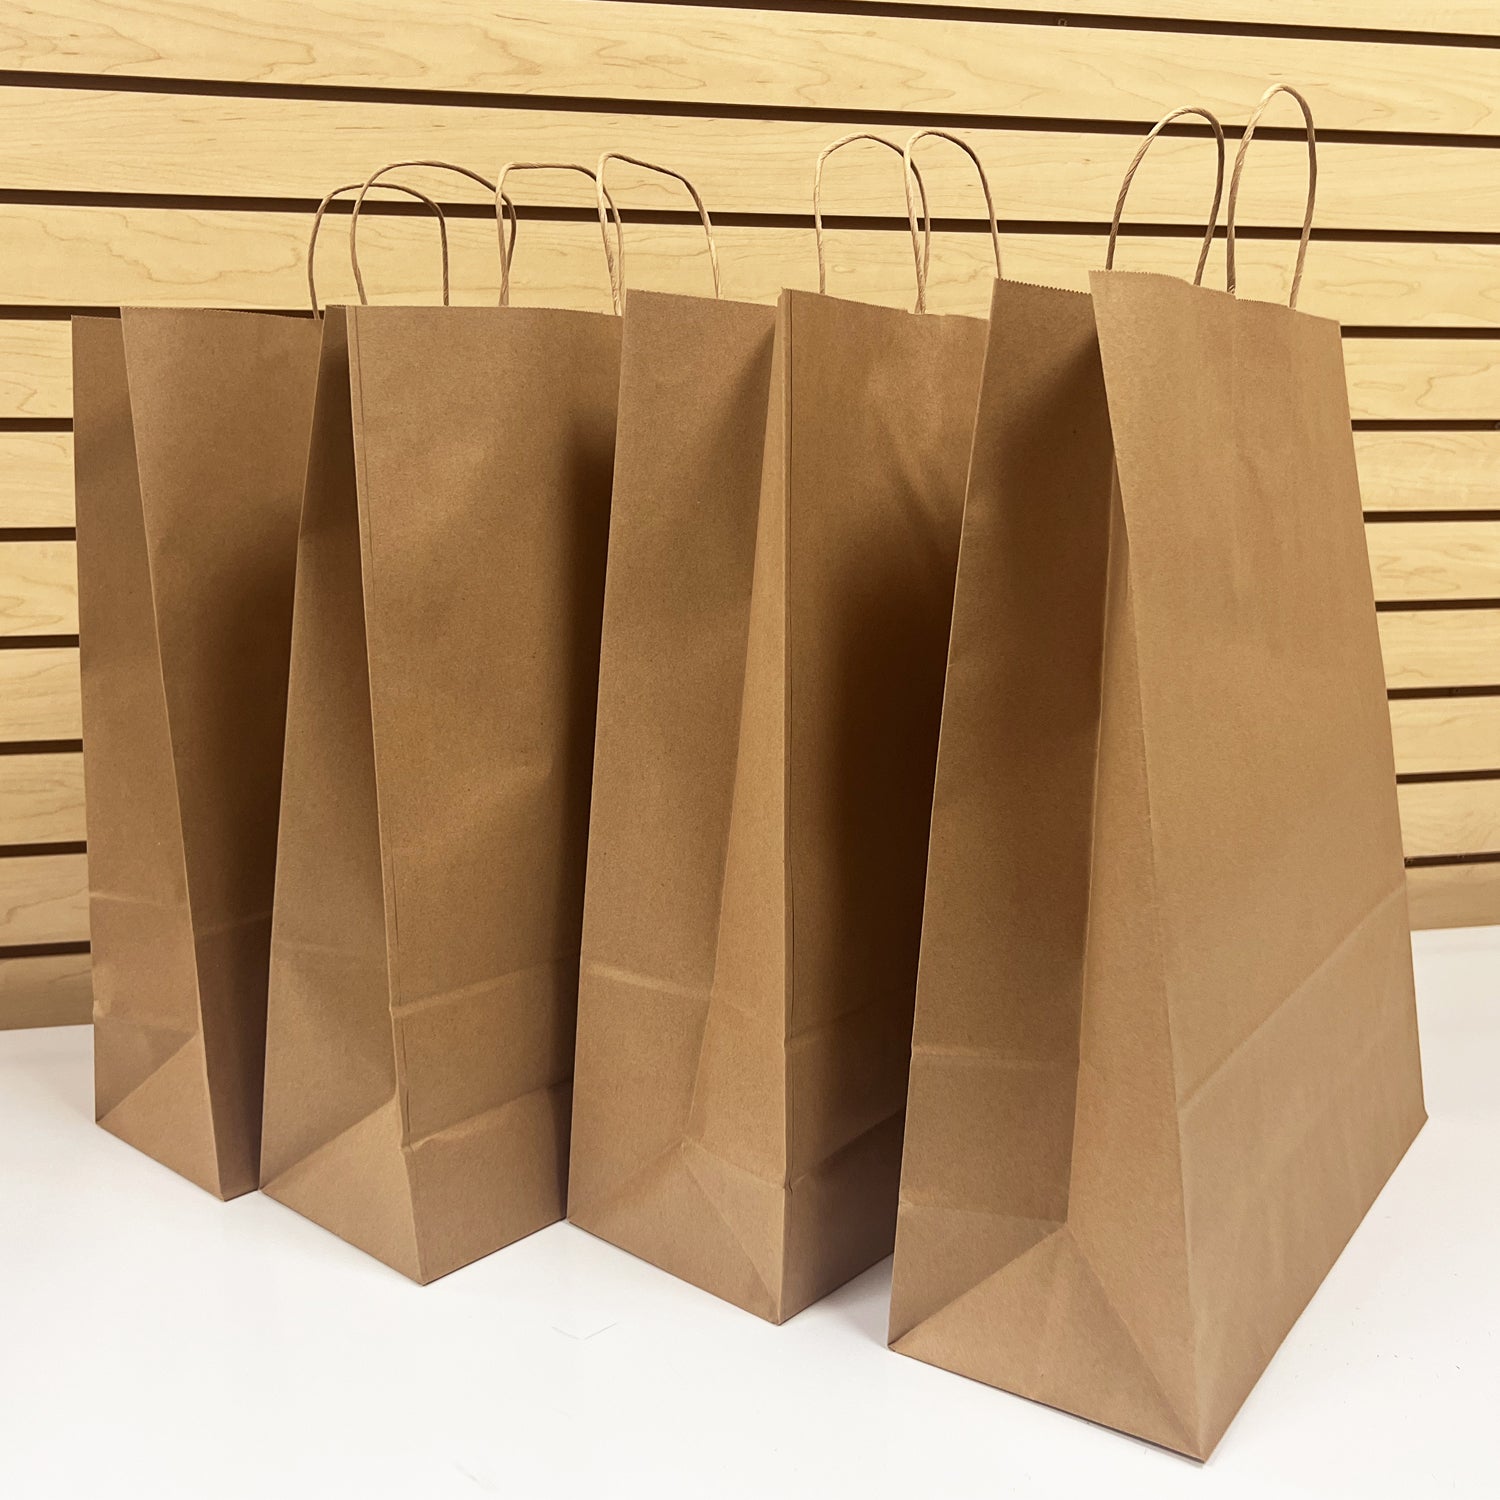 200 Pcs, Queen,  16x6x19.25 inches, Kraft Paper Bags, with Twisted Handle